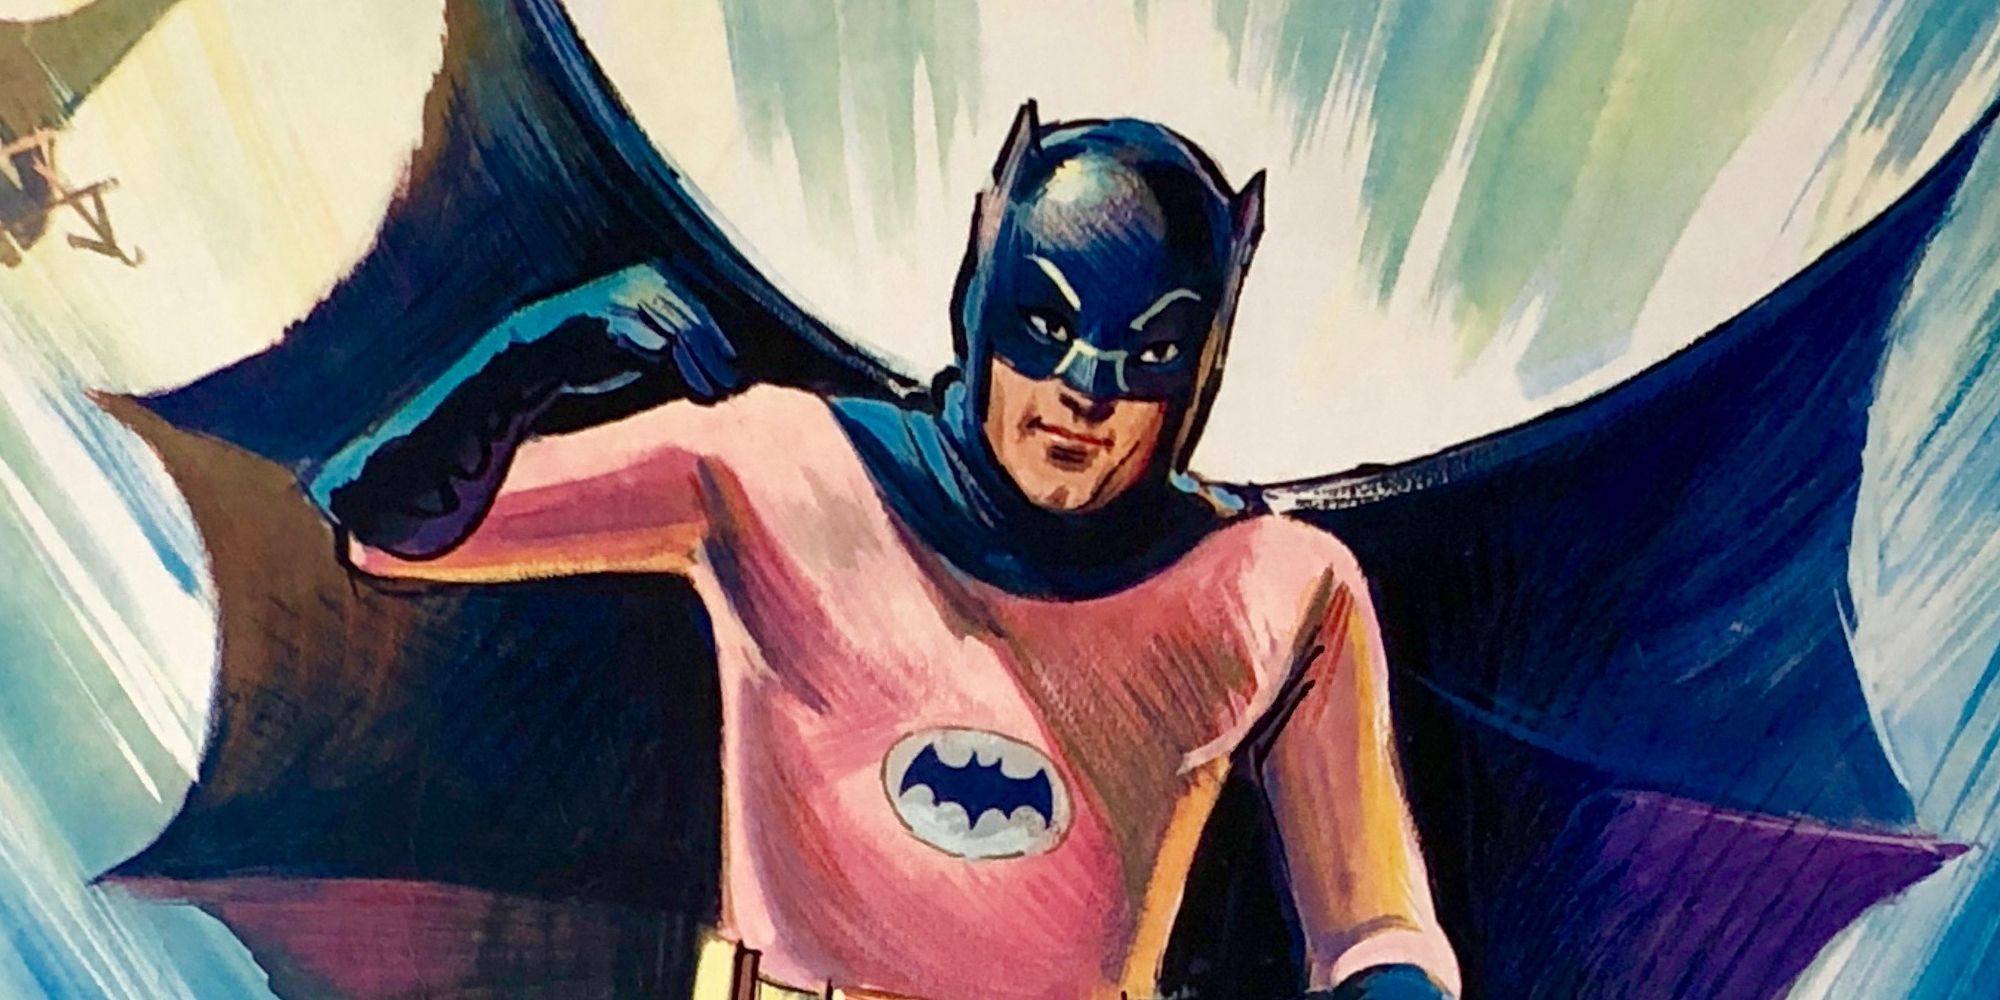 A close up of a poster for The Batman movie from 1966, spotlighting Batman